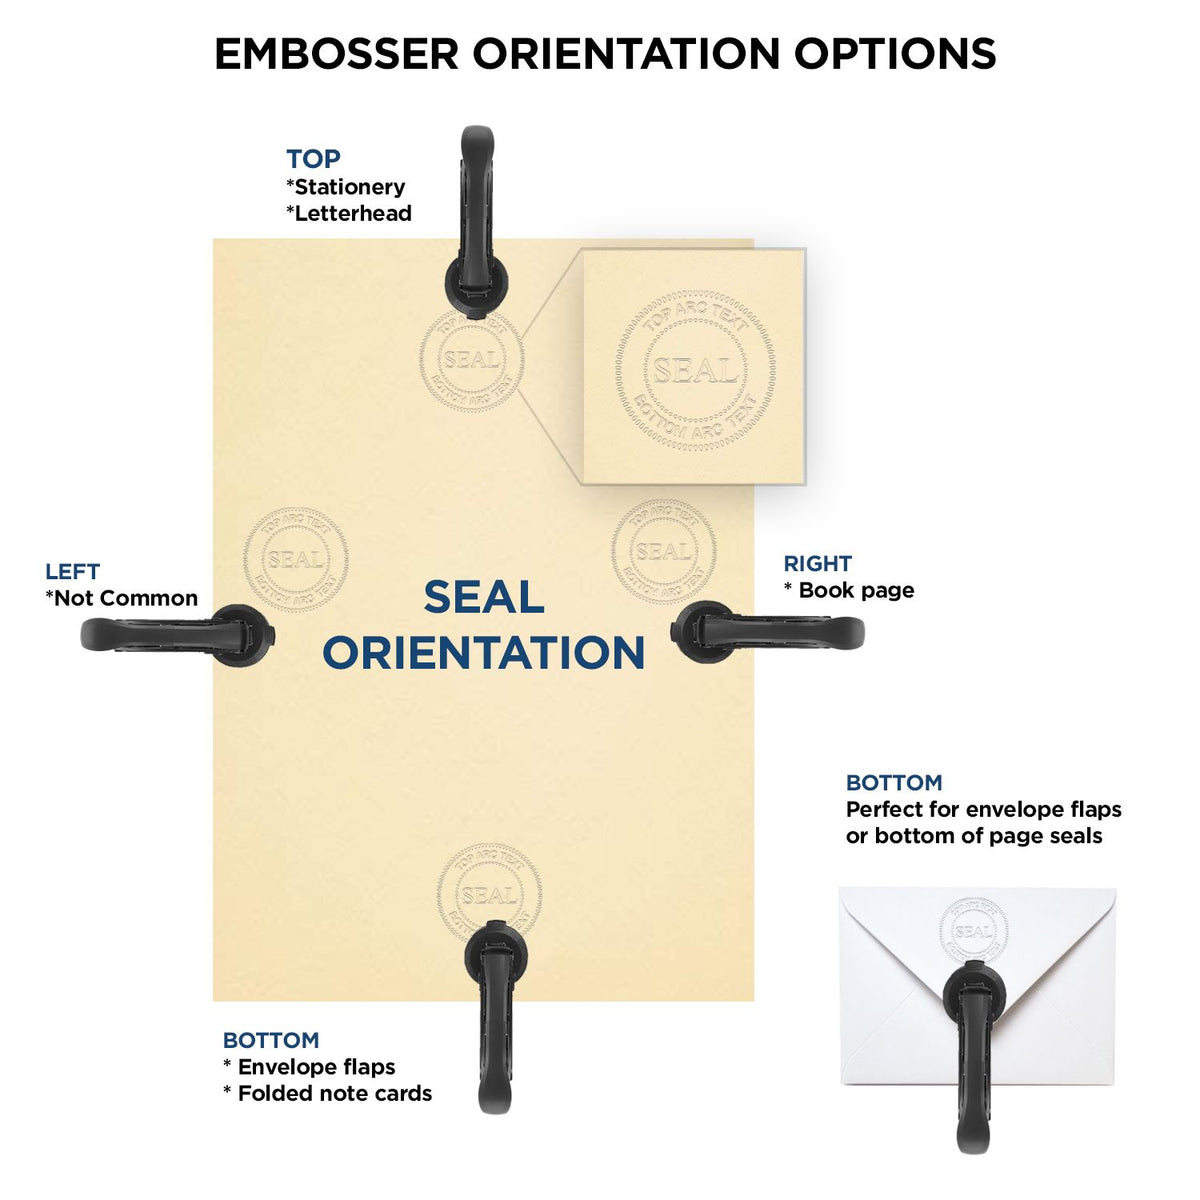 An infographic for the State of Mississippi Long Reach Architectural Embossing Seal showing embosser orientation, this is showing examples of a top, bottom, right and left insert.